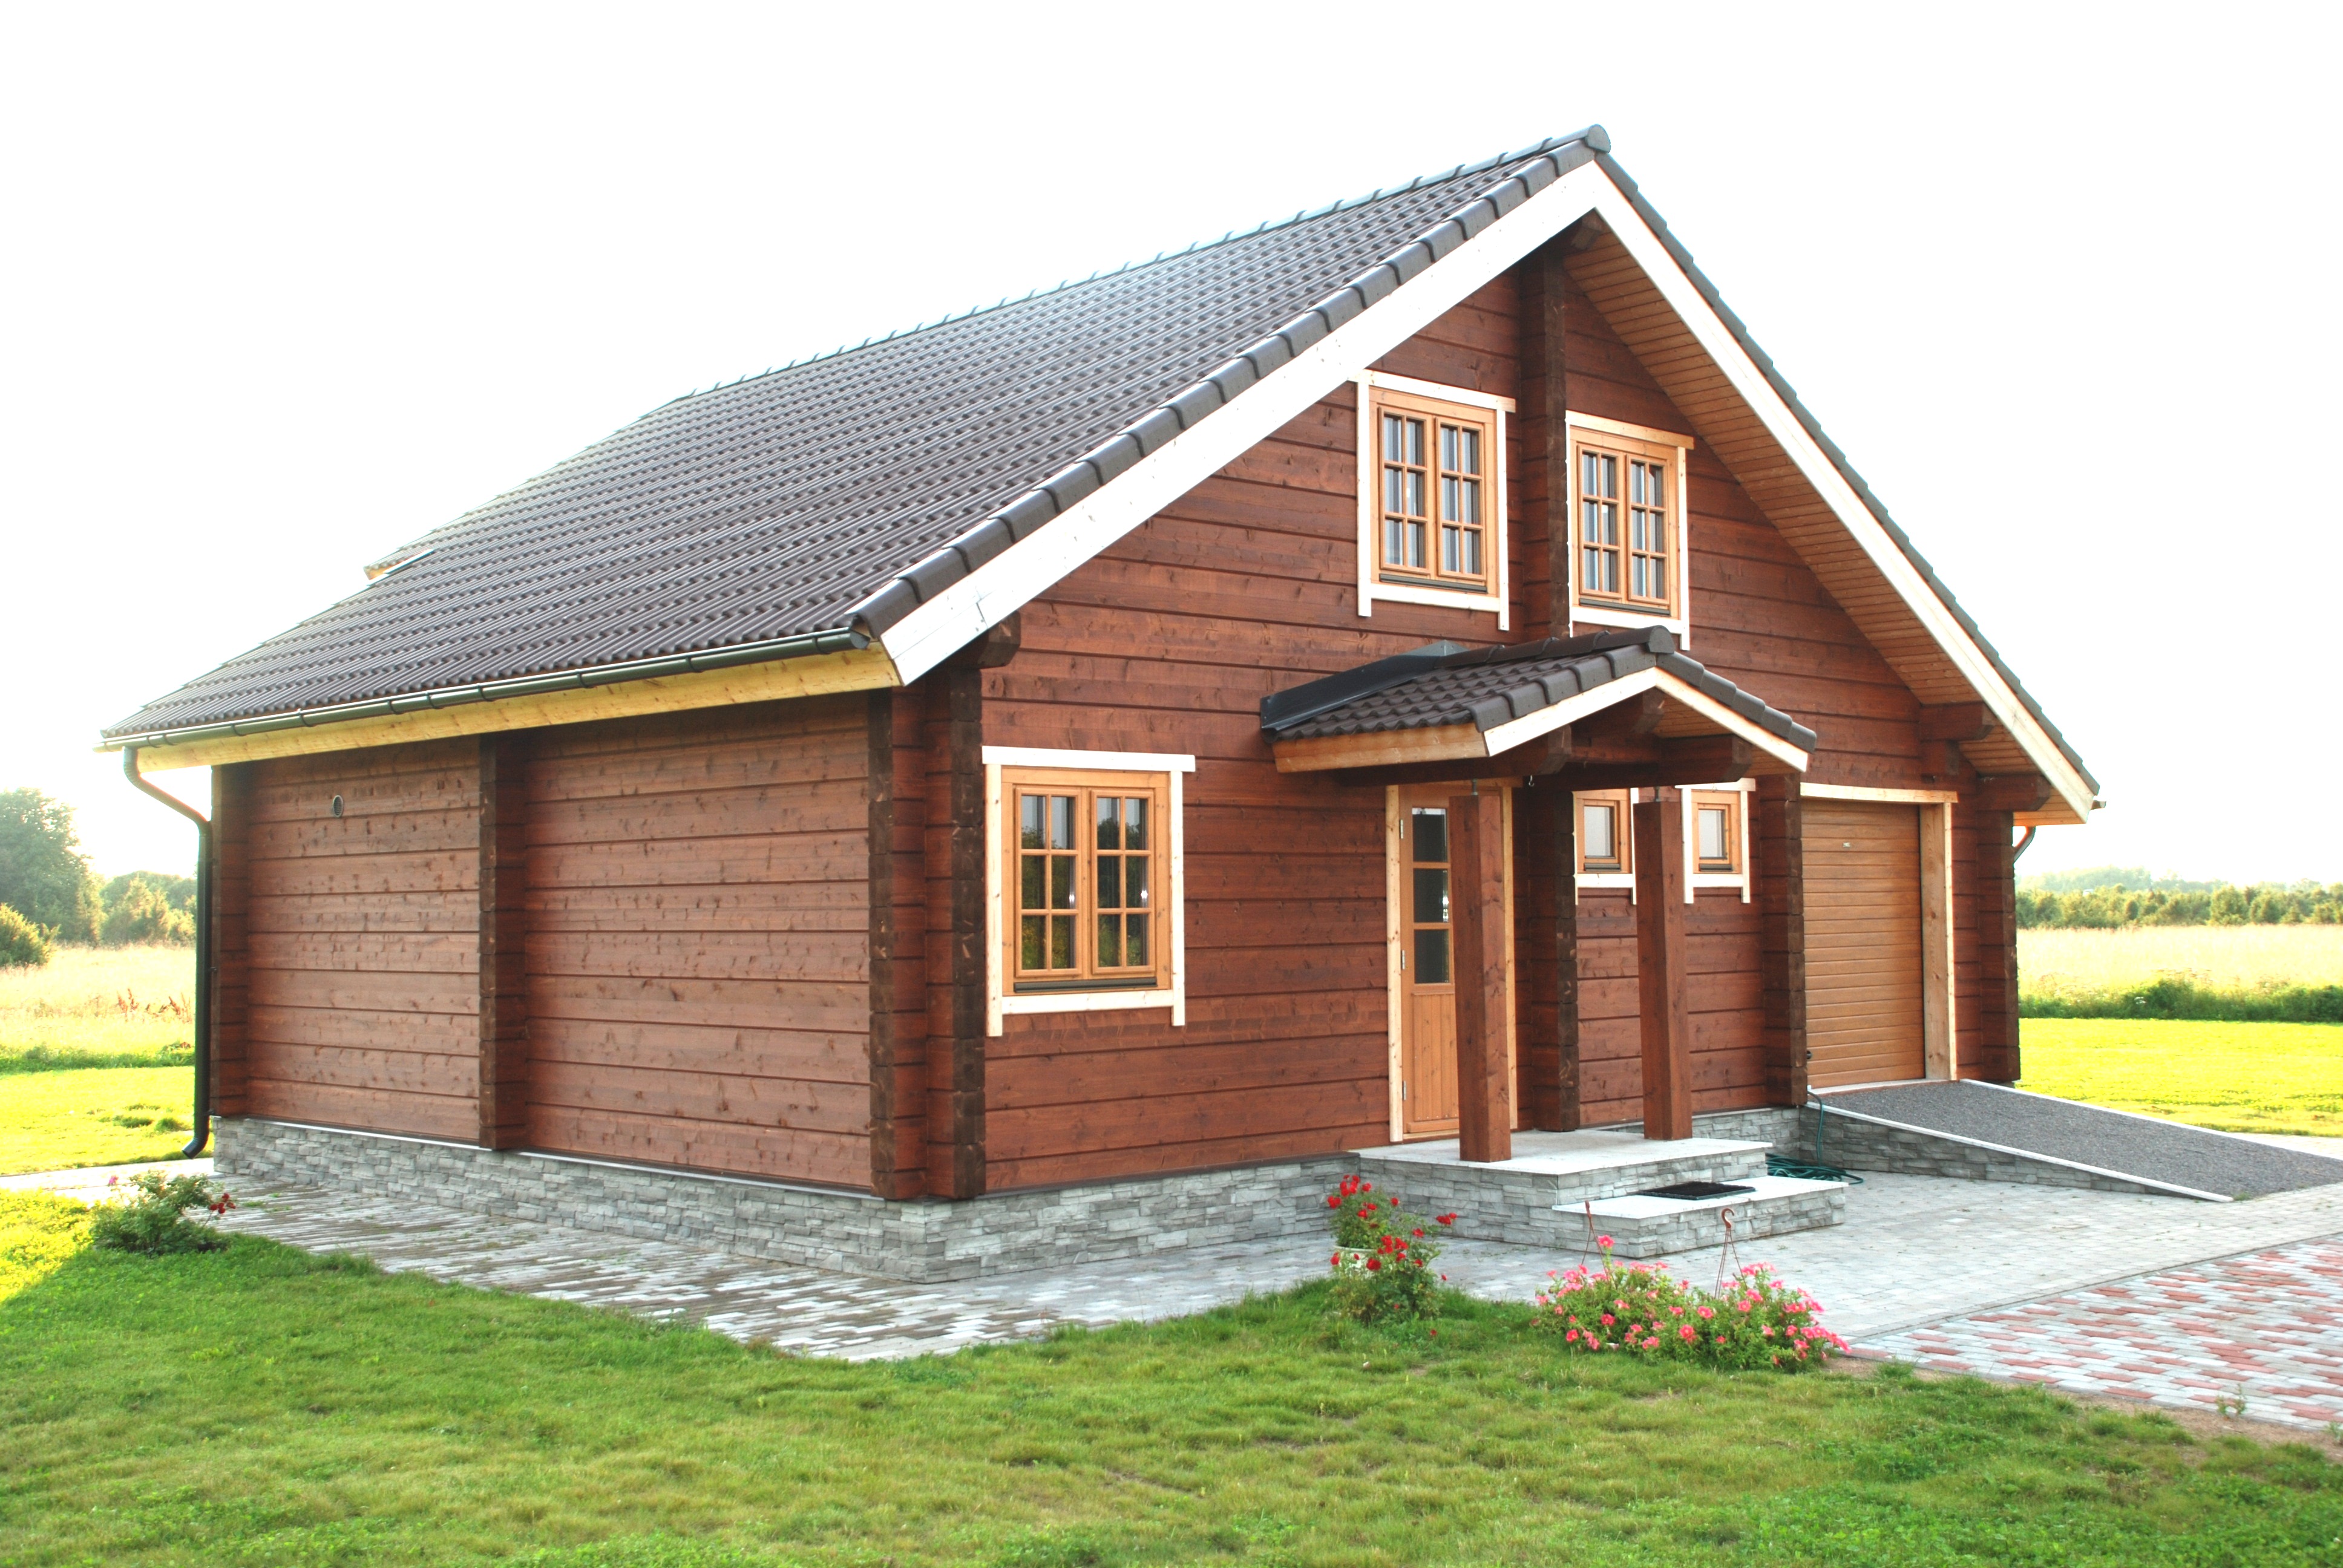 Good tips for painting a wooden house | Blog | Palmatin Wooden Houses